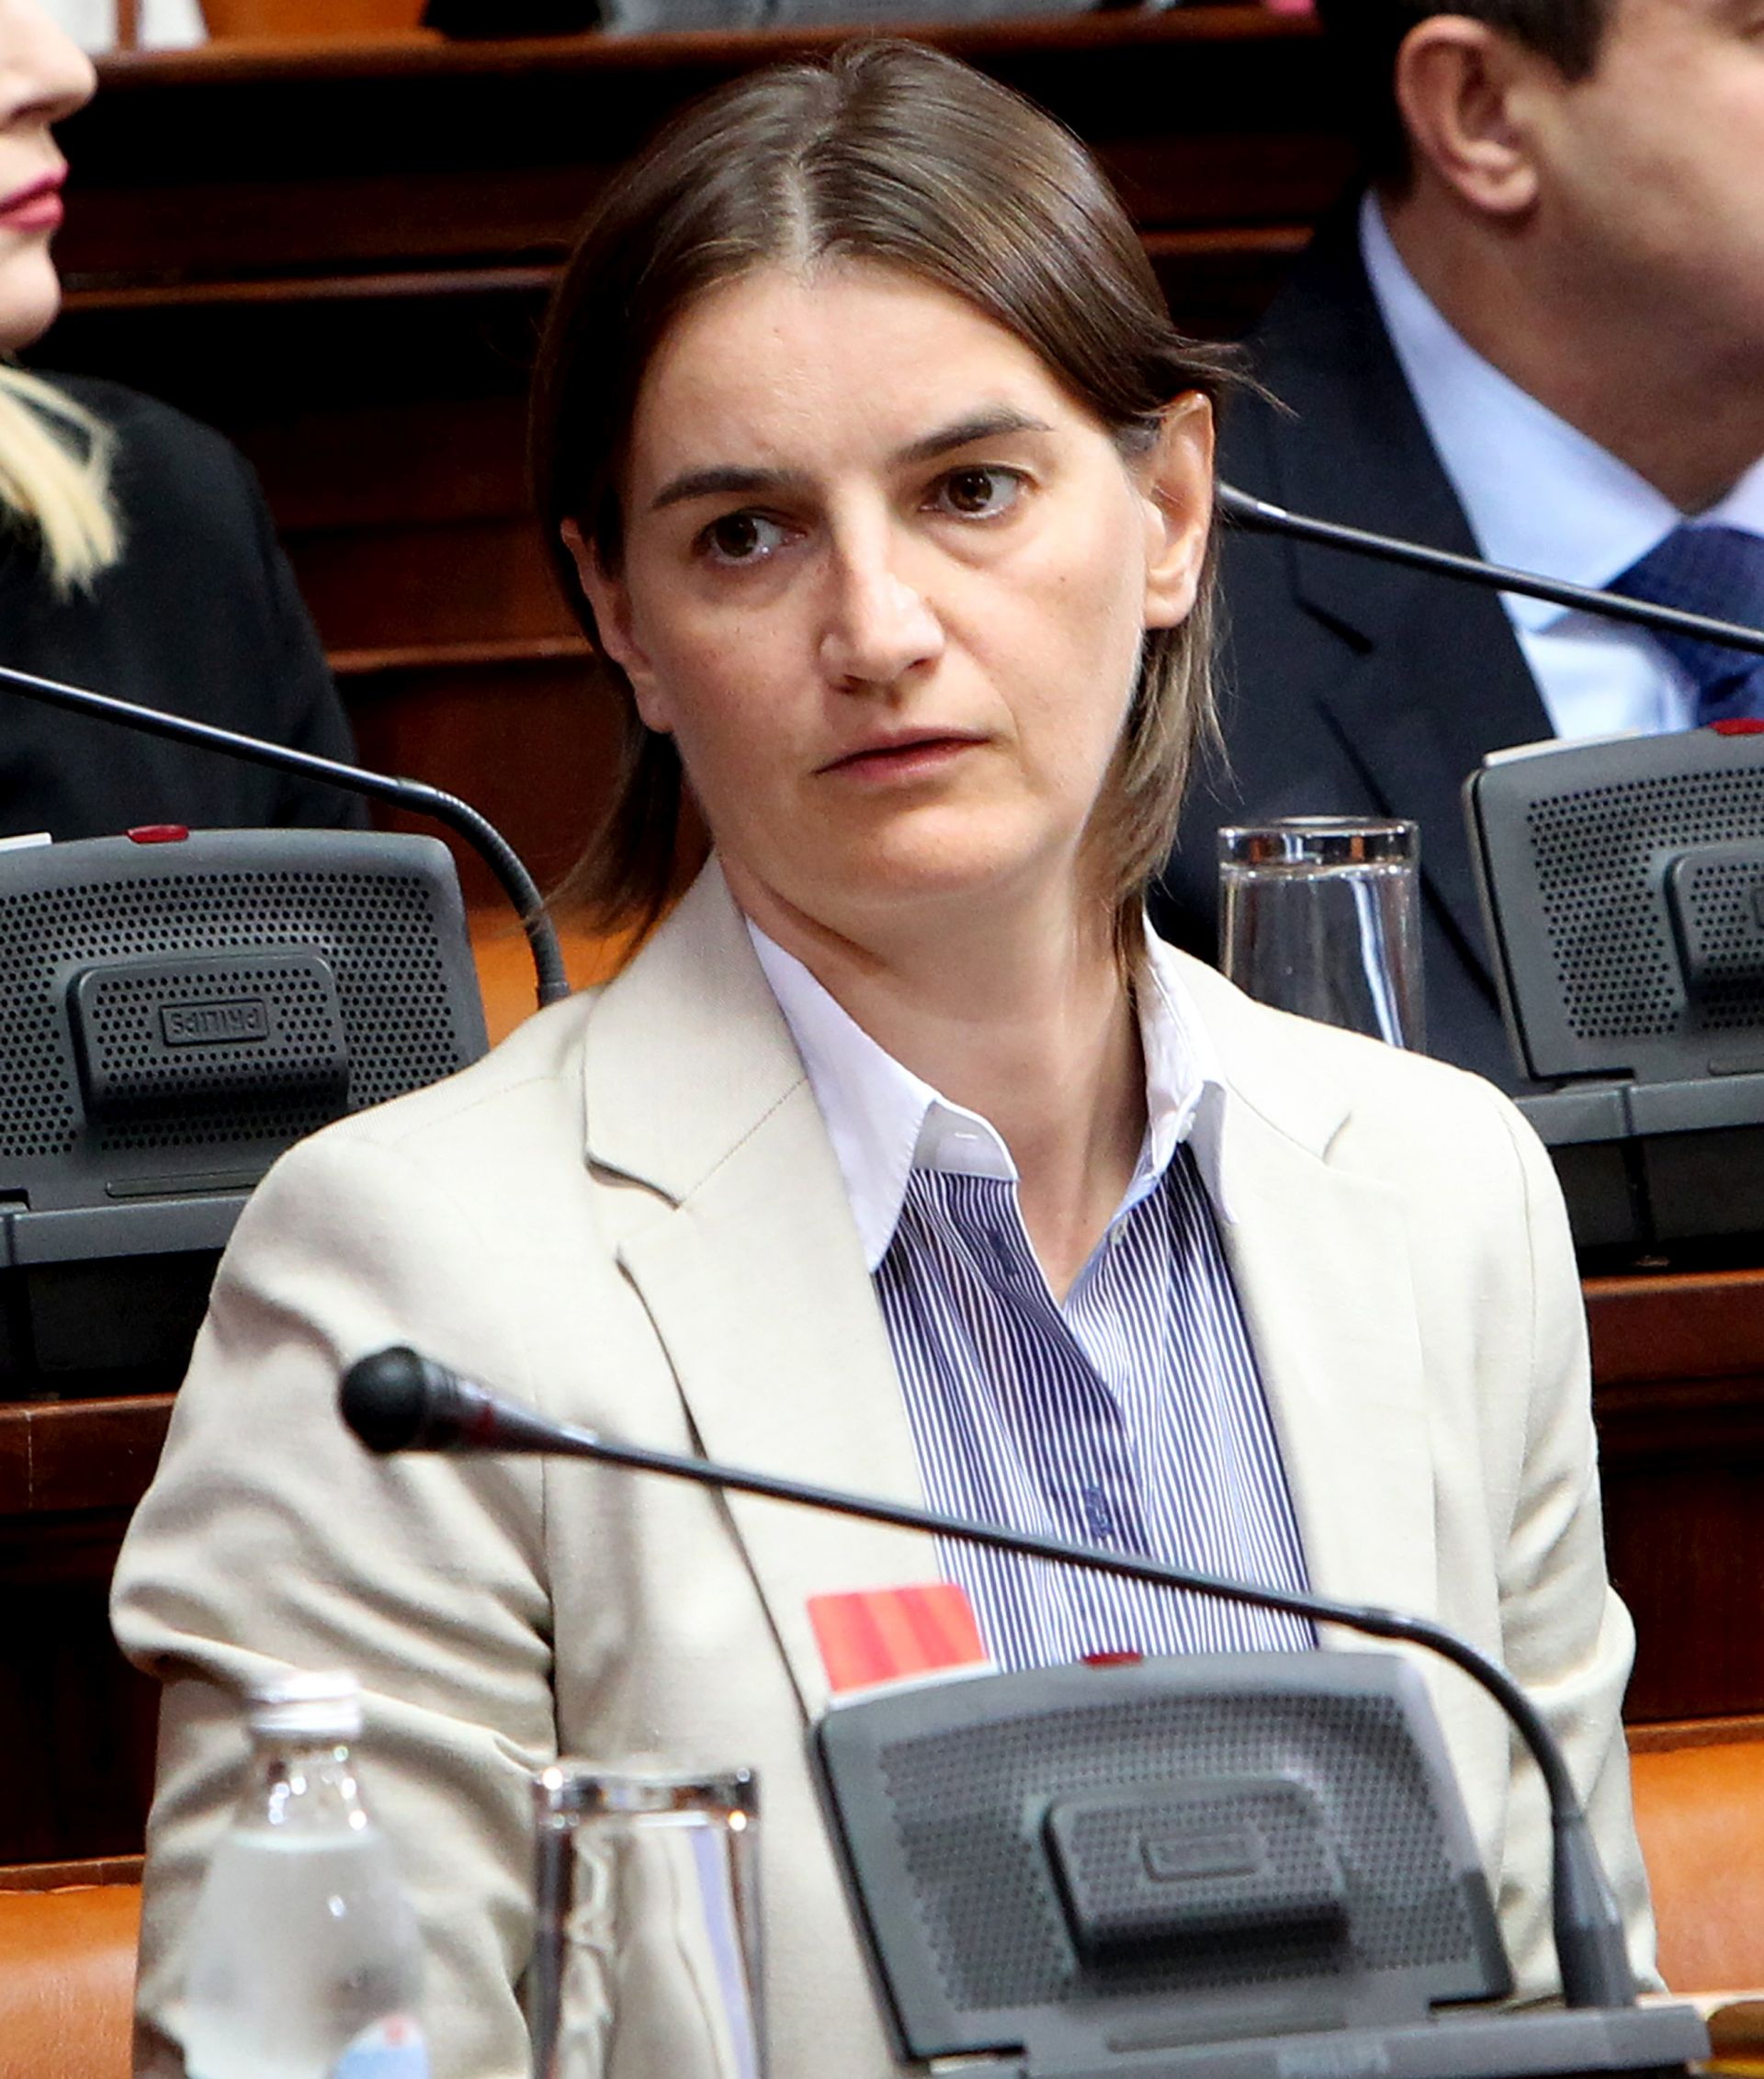 epa06030181 (FILE) - Serbian minister Ana Brnabic during the parliament session in Belgrade, Serbia, 09 August 2016 (reissued 15 June 2017). Serbia's President Aleksandar Vucic has nominated the independent MP Ana Brnabic as Prime Minister, 15 June 2017. Brnabis will become the first woman and first openly-gay politician to occupy the role in the highly conservative Balkan country.  EPA/KOCA SULEJMANOVIC